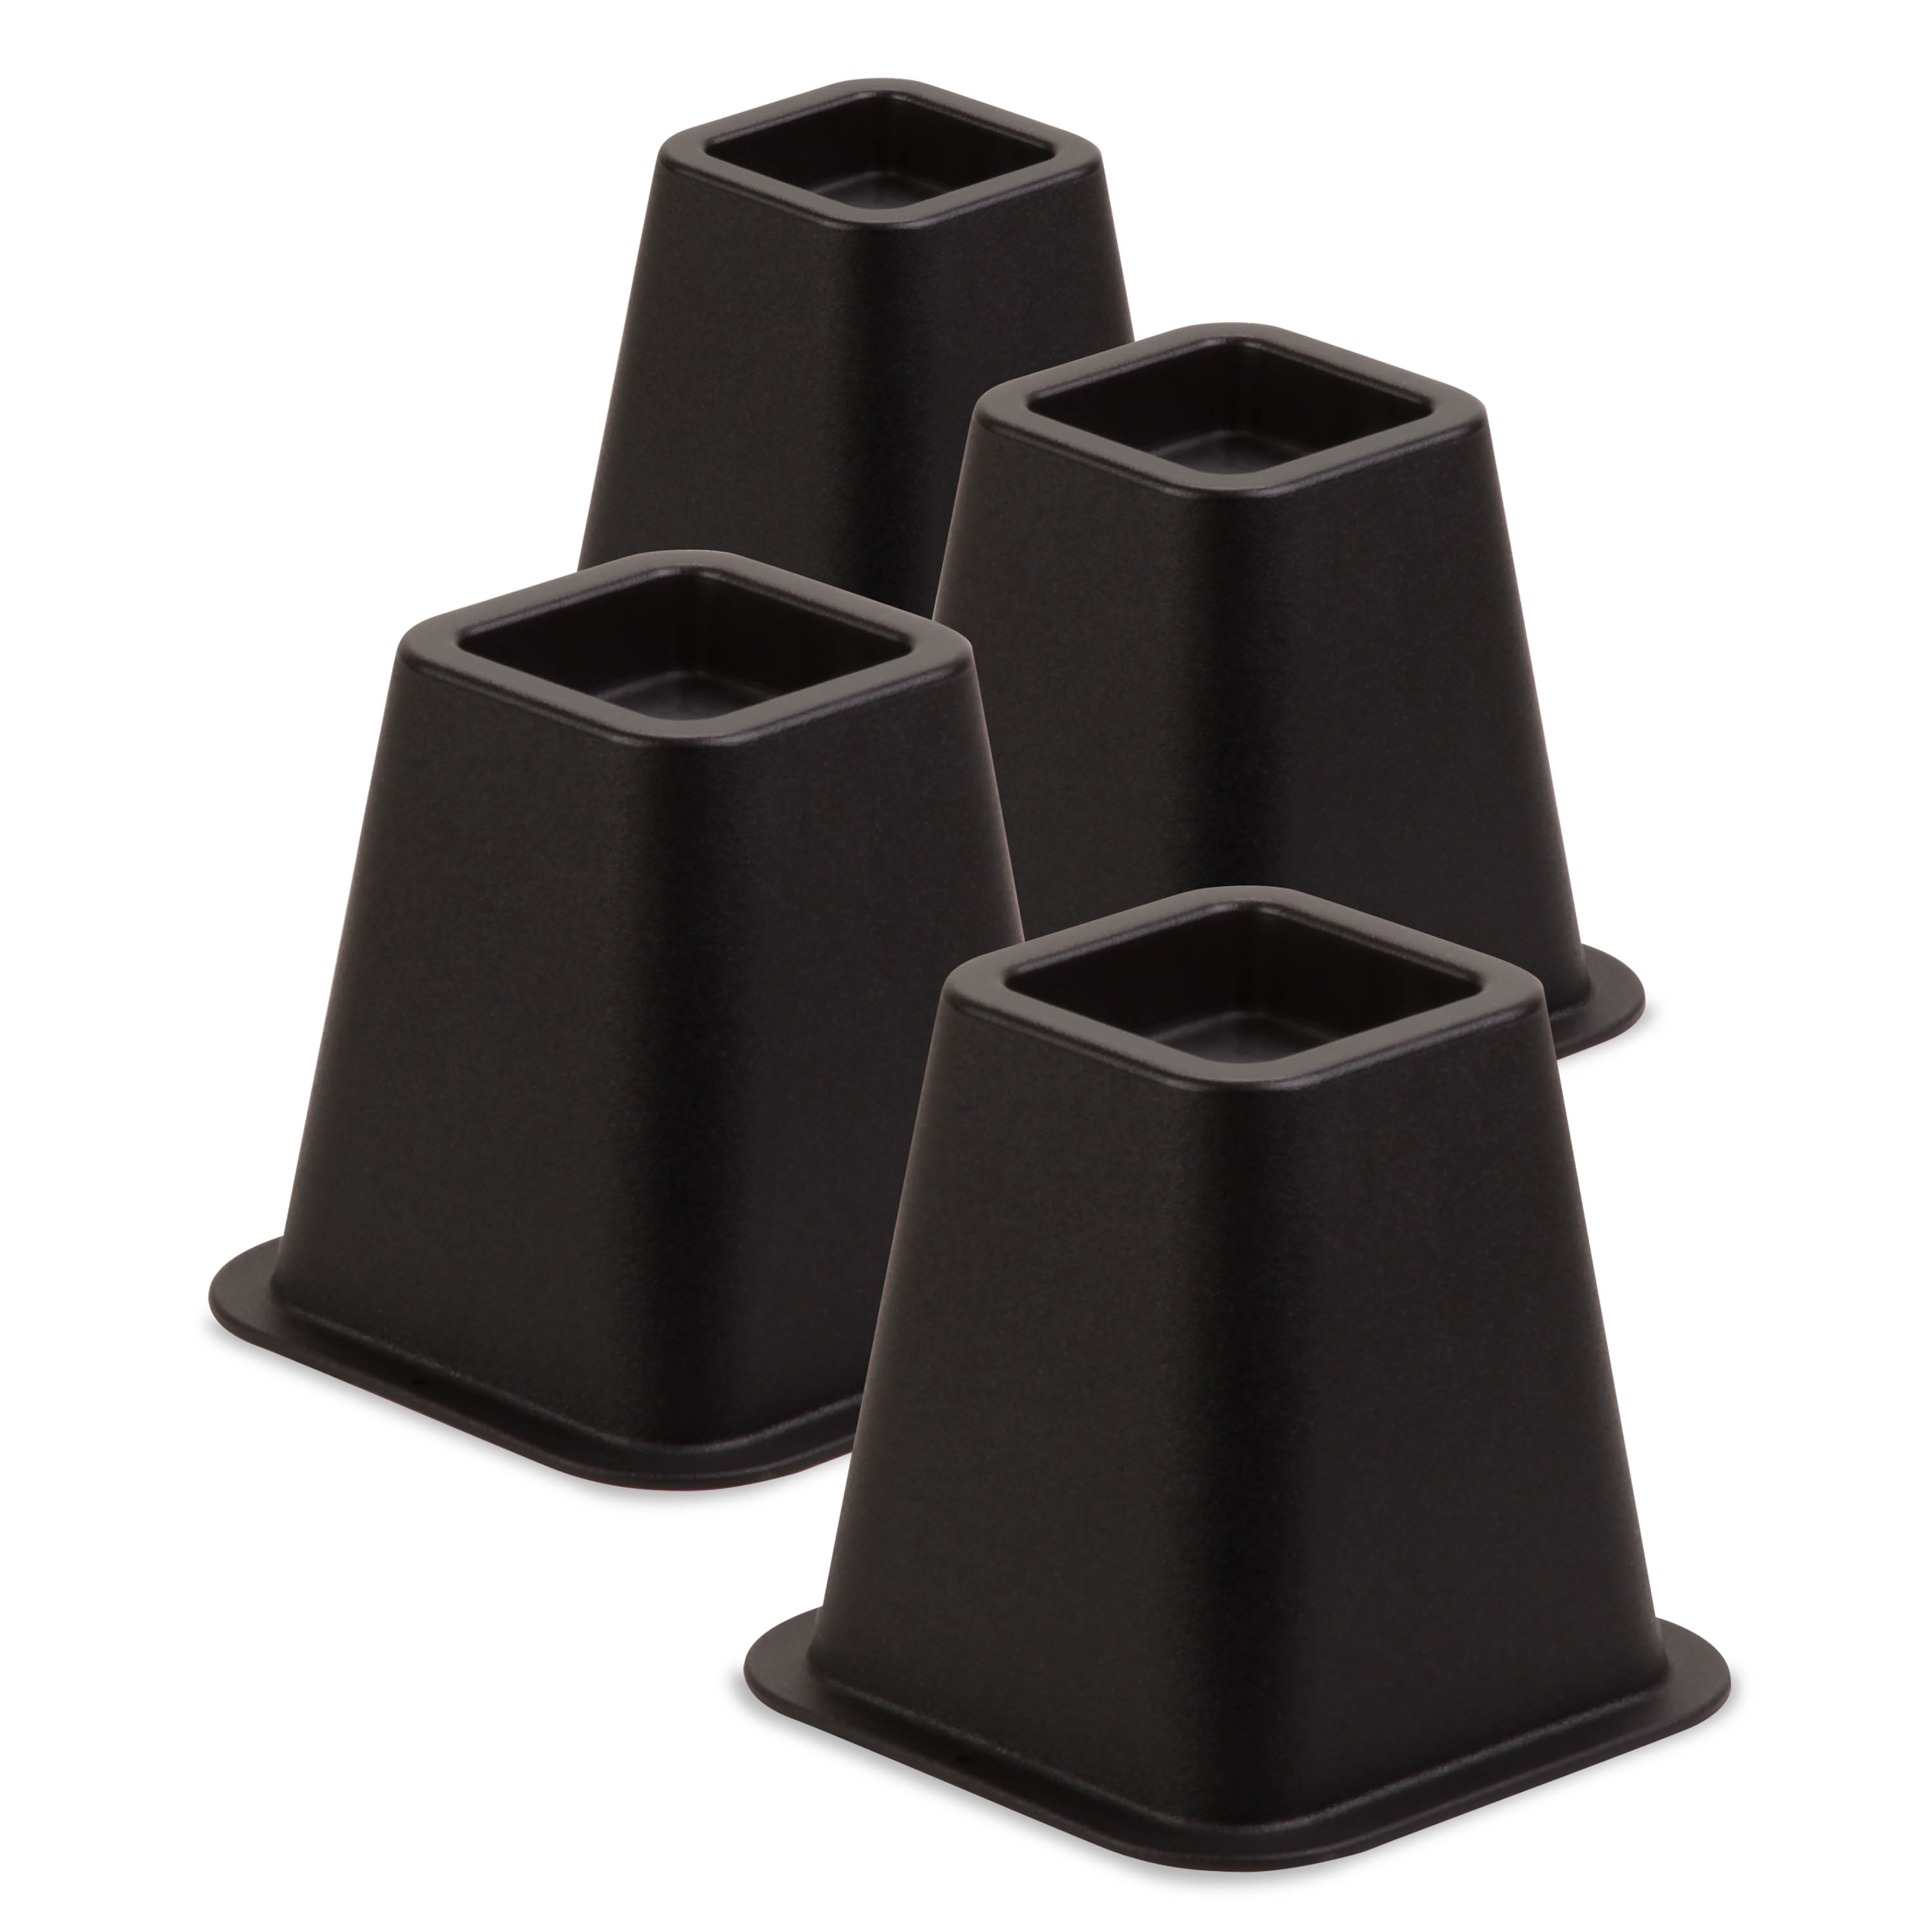 Honey-Can-Do Black Plastic 6" Bed Risers, Set of 4 - image 3 of 4